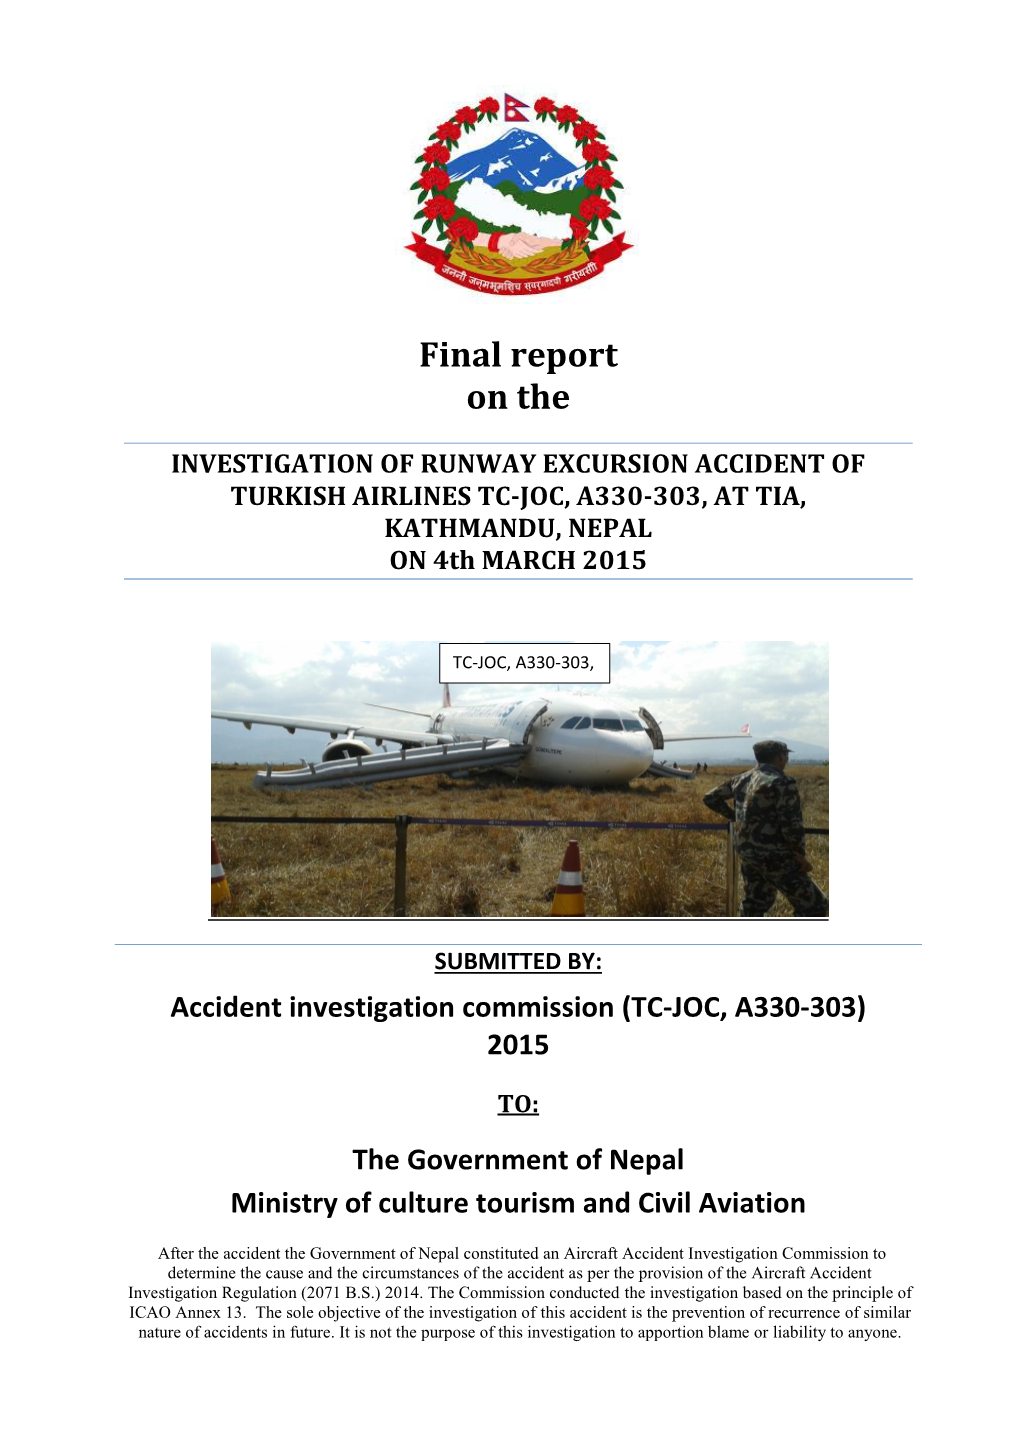 Final Report on the Investigation of the Accident of TC-JOC, A330-303, at TIA , KTM on 4 March 2015